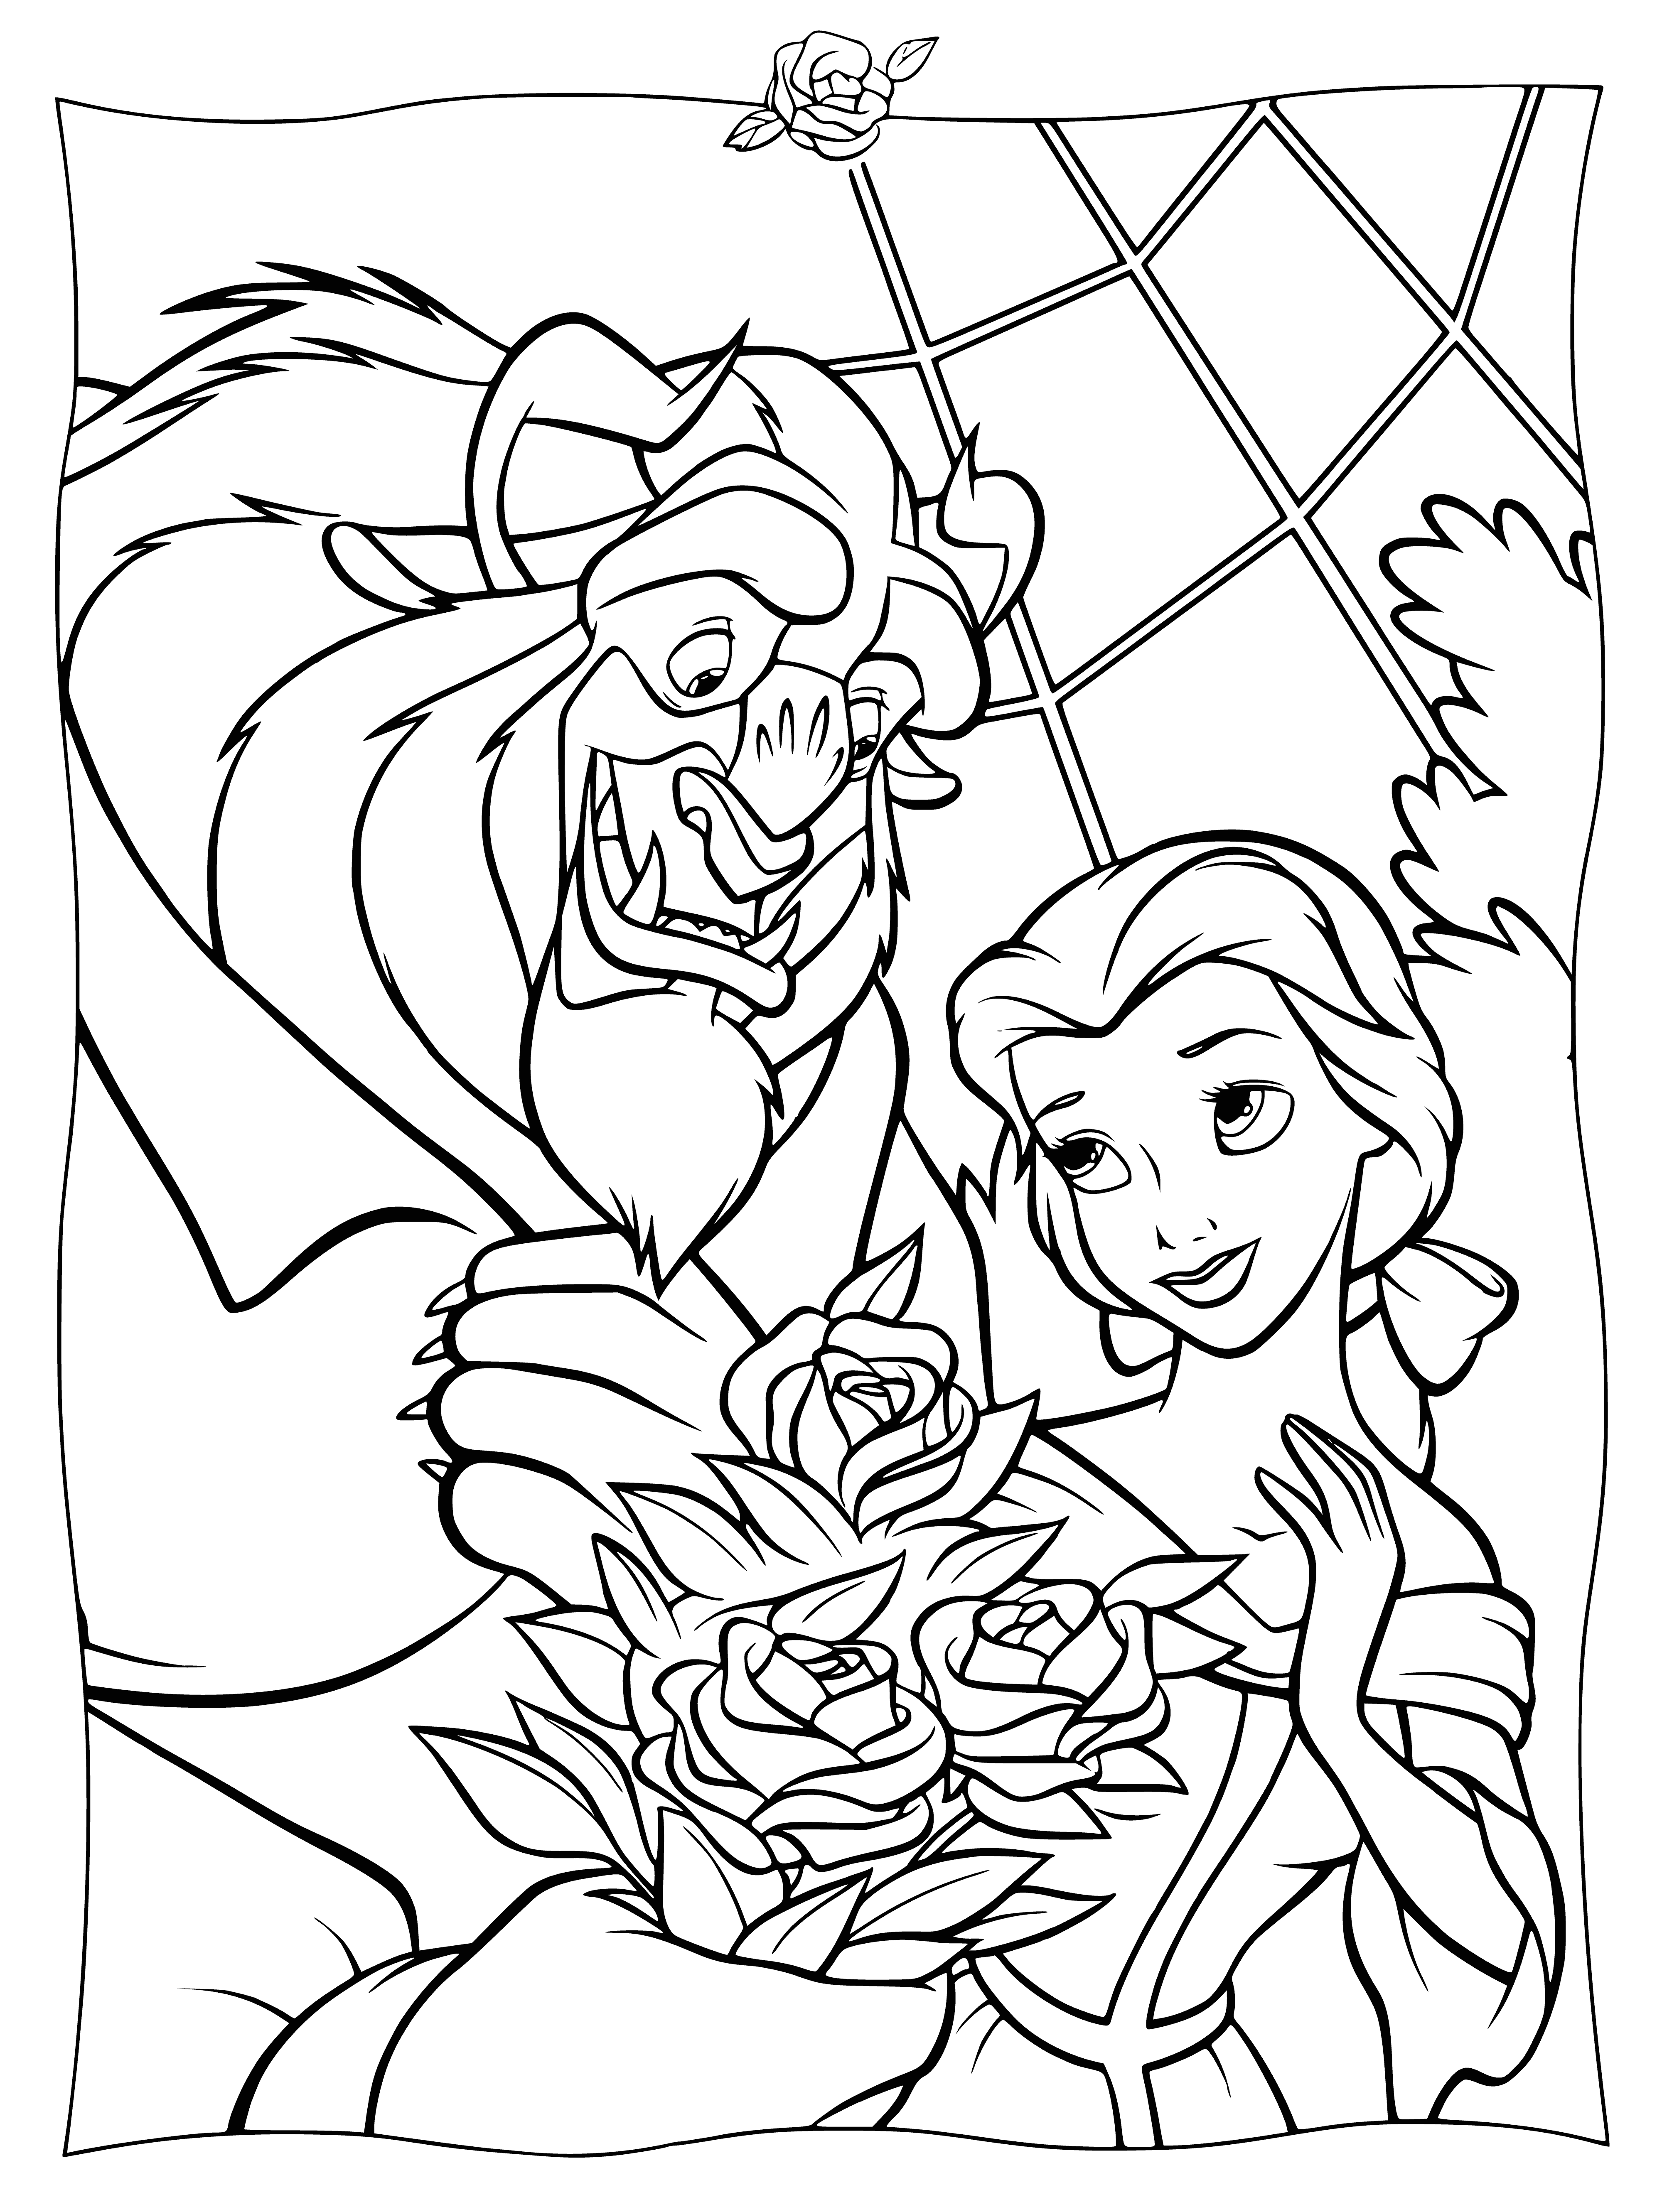 The Beast and Belle coloring page